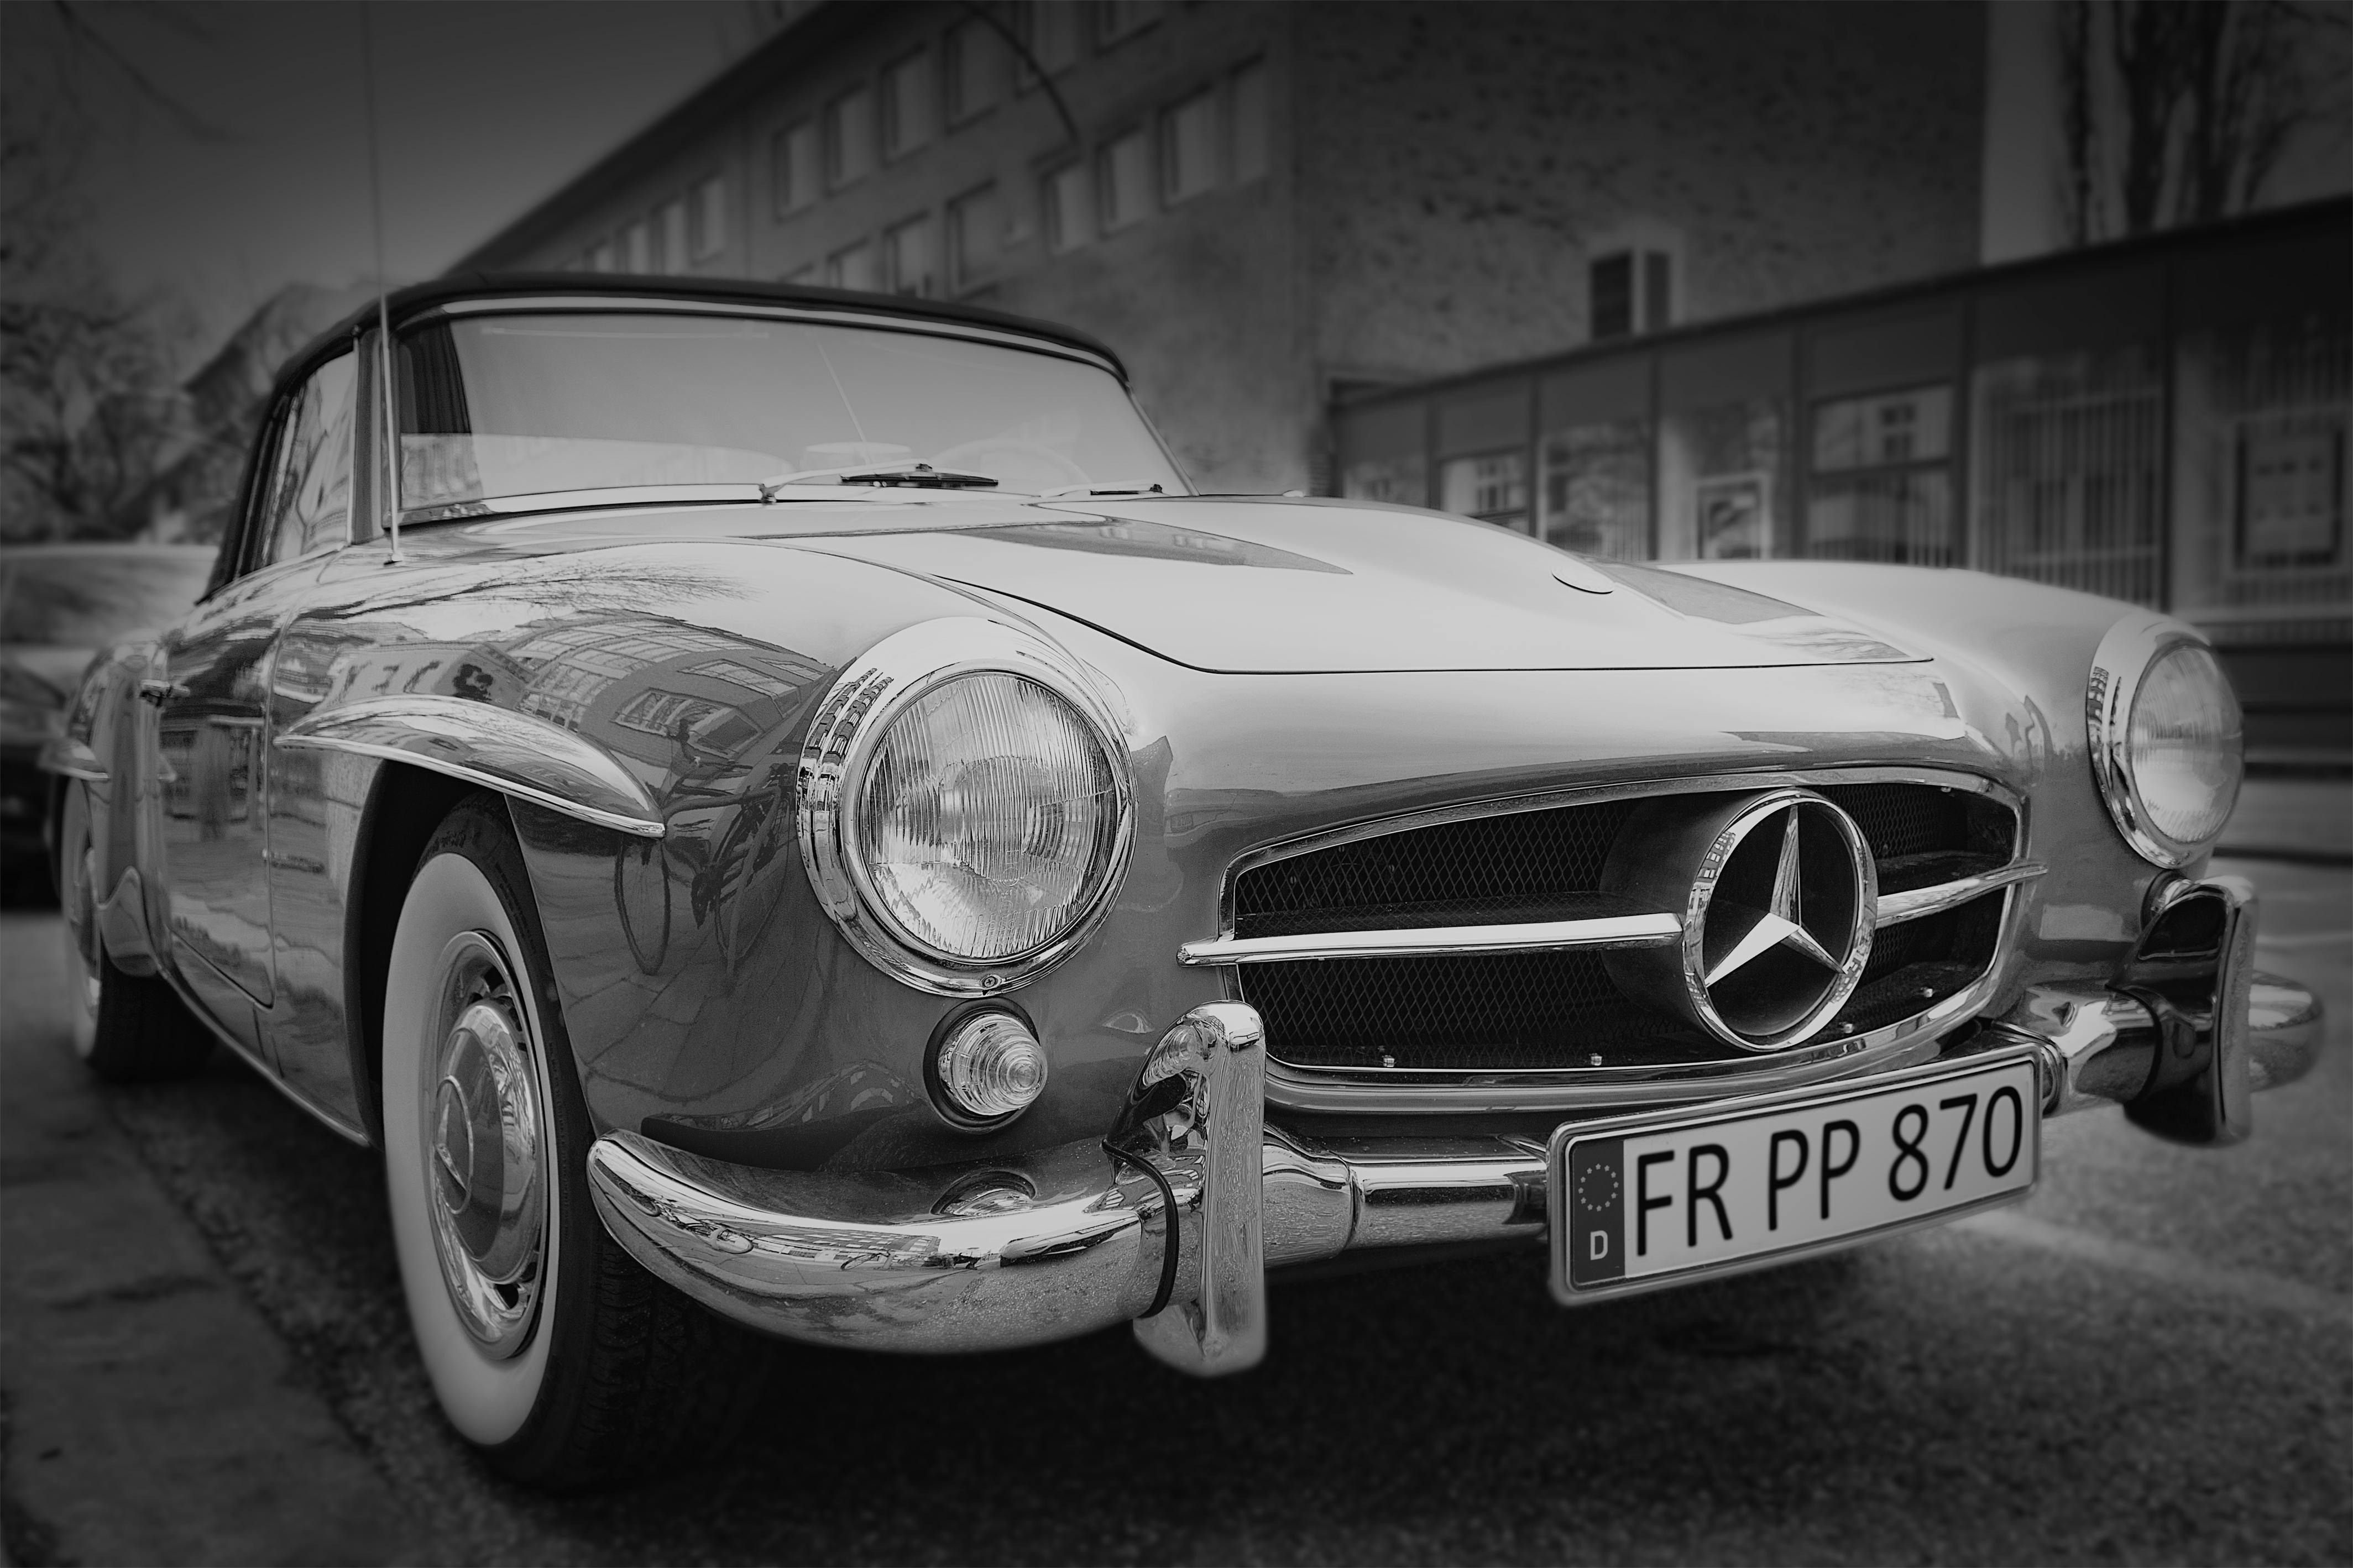 Grayscale Photography of Classic Mercedes Benz Car \u00b7 Free Stock Photo